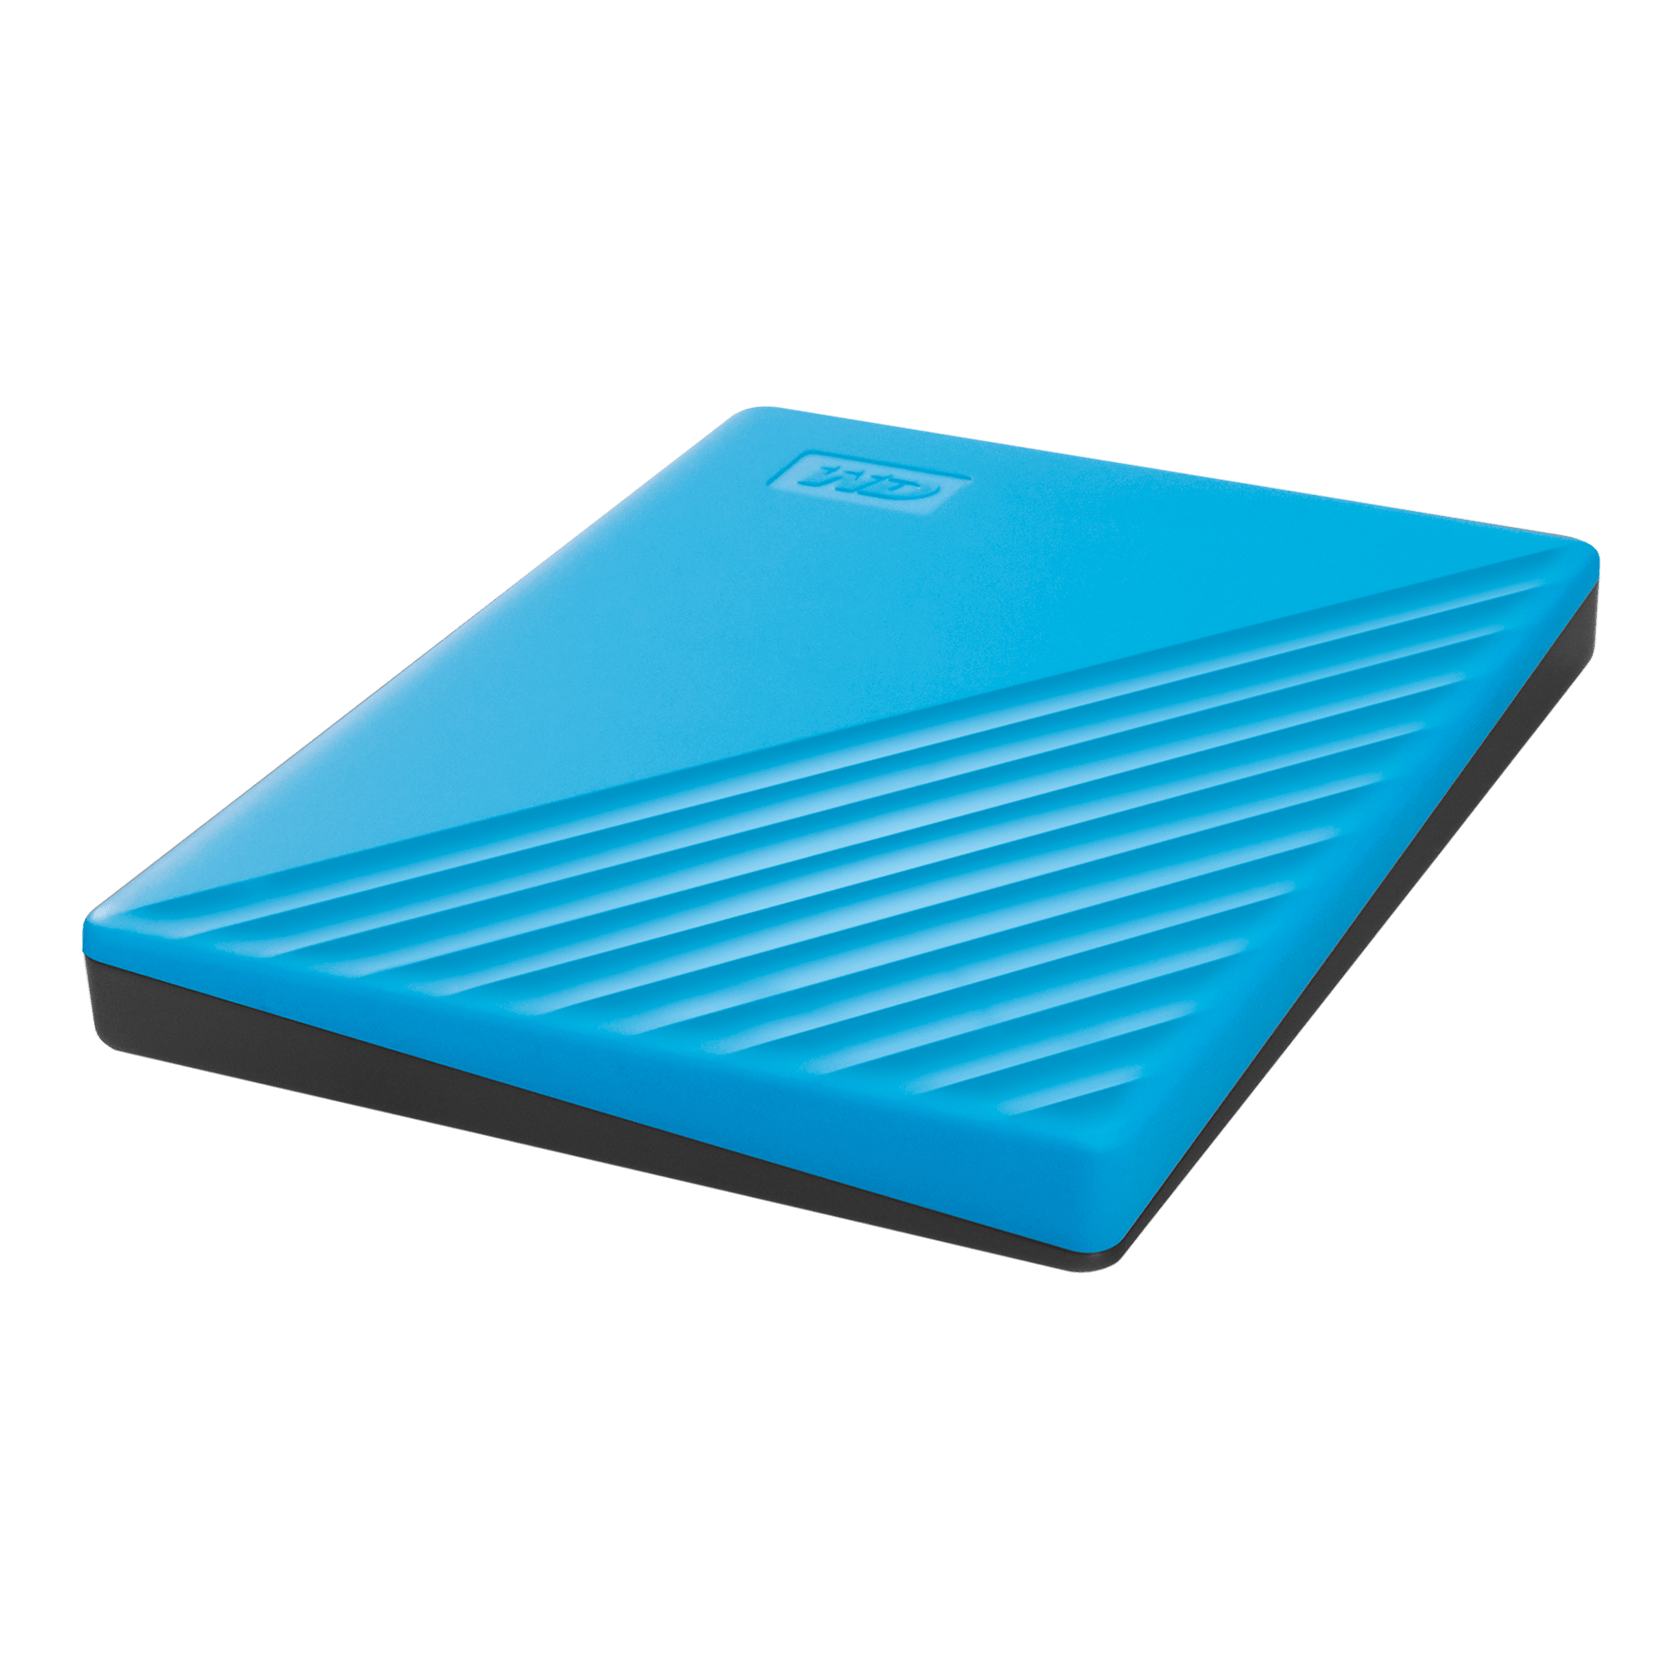 WD 2TB My Passport, Portable External Hard Drive, Blue - WDBYVG0020BBL-WESN - image 4 of 8